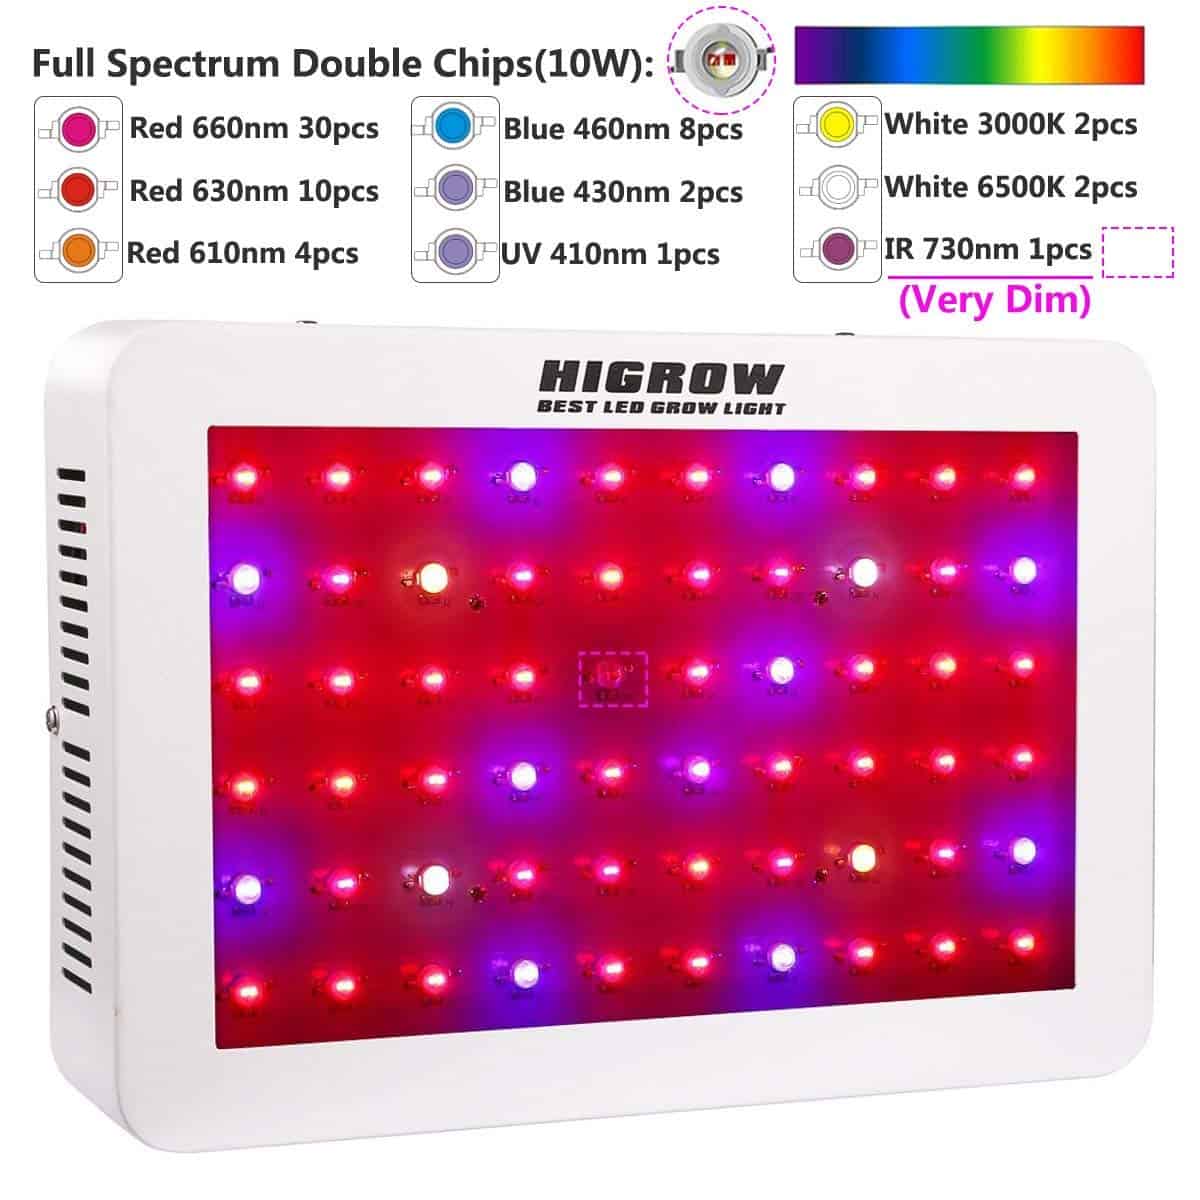 HIGROW 600W Double Chips LED Grow Light - Diode Layout